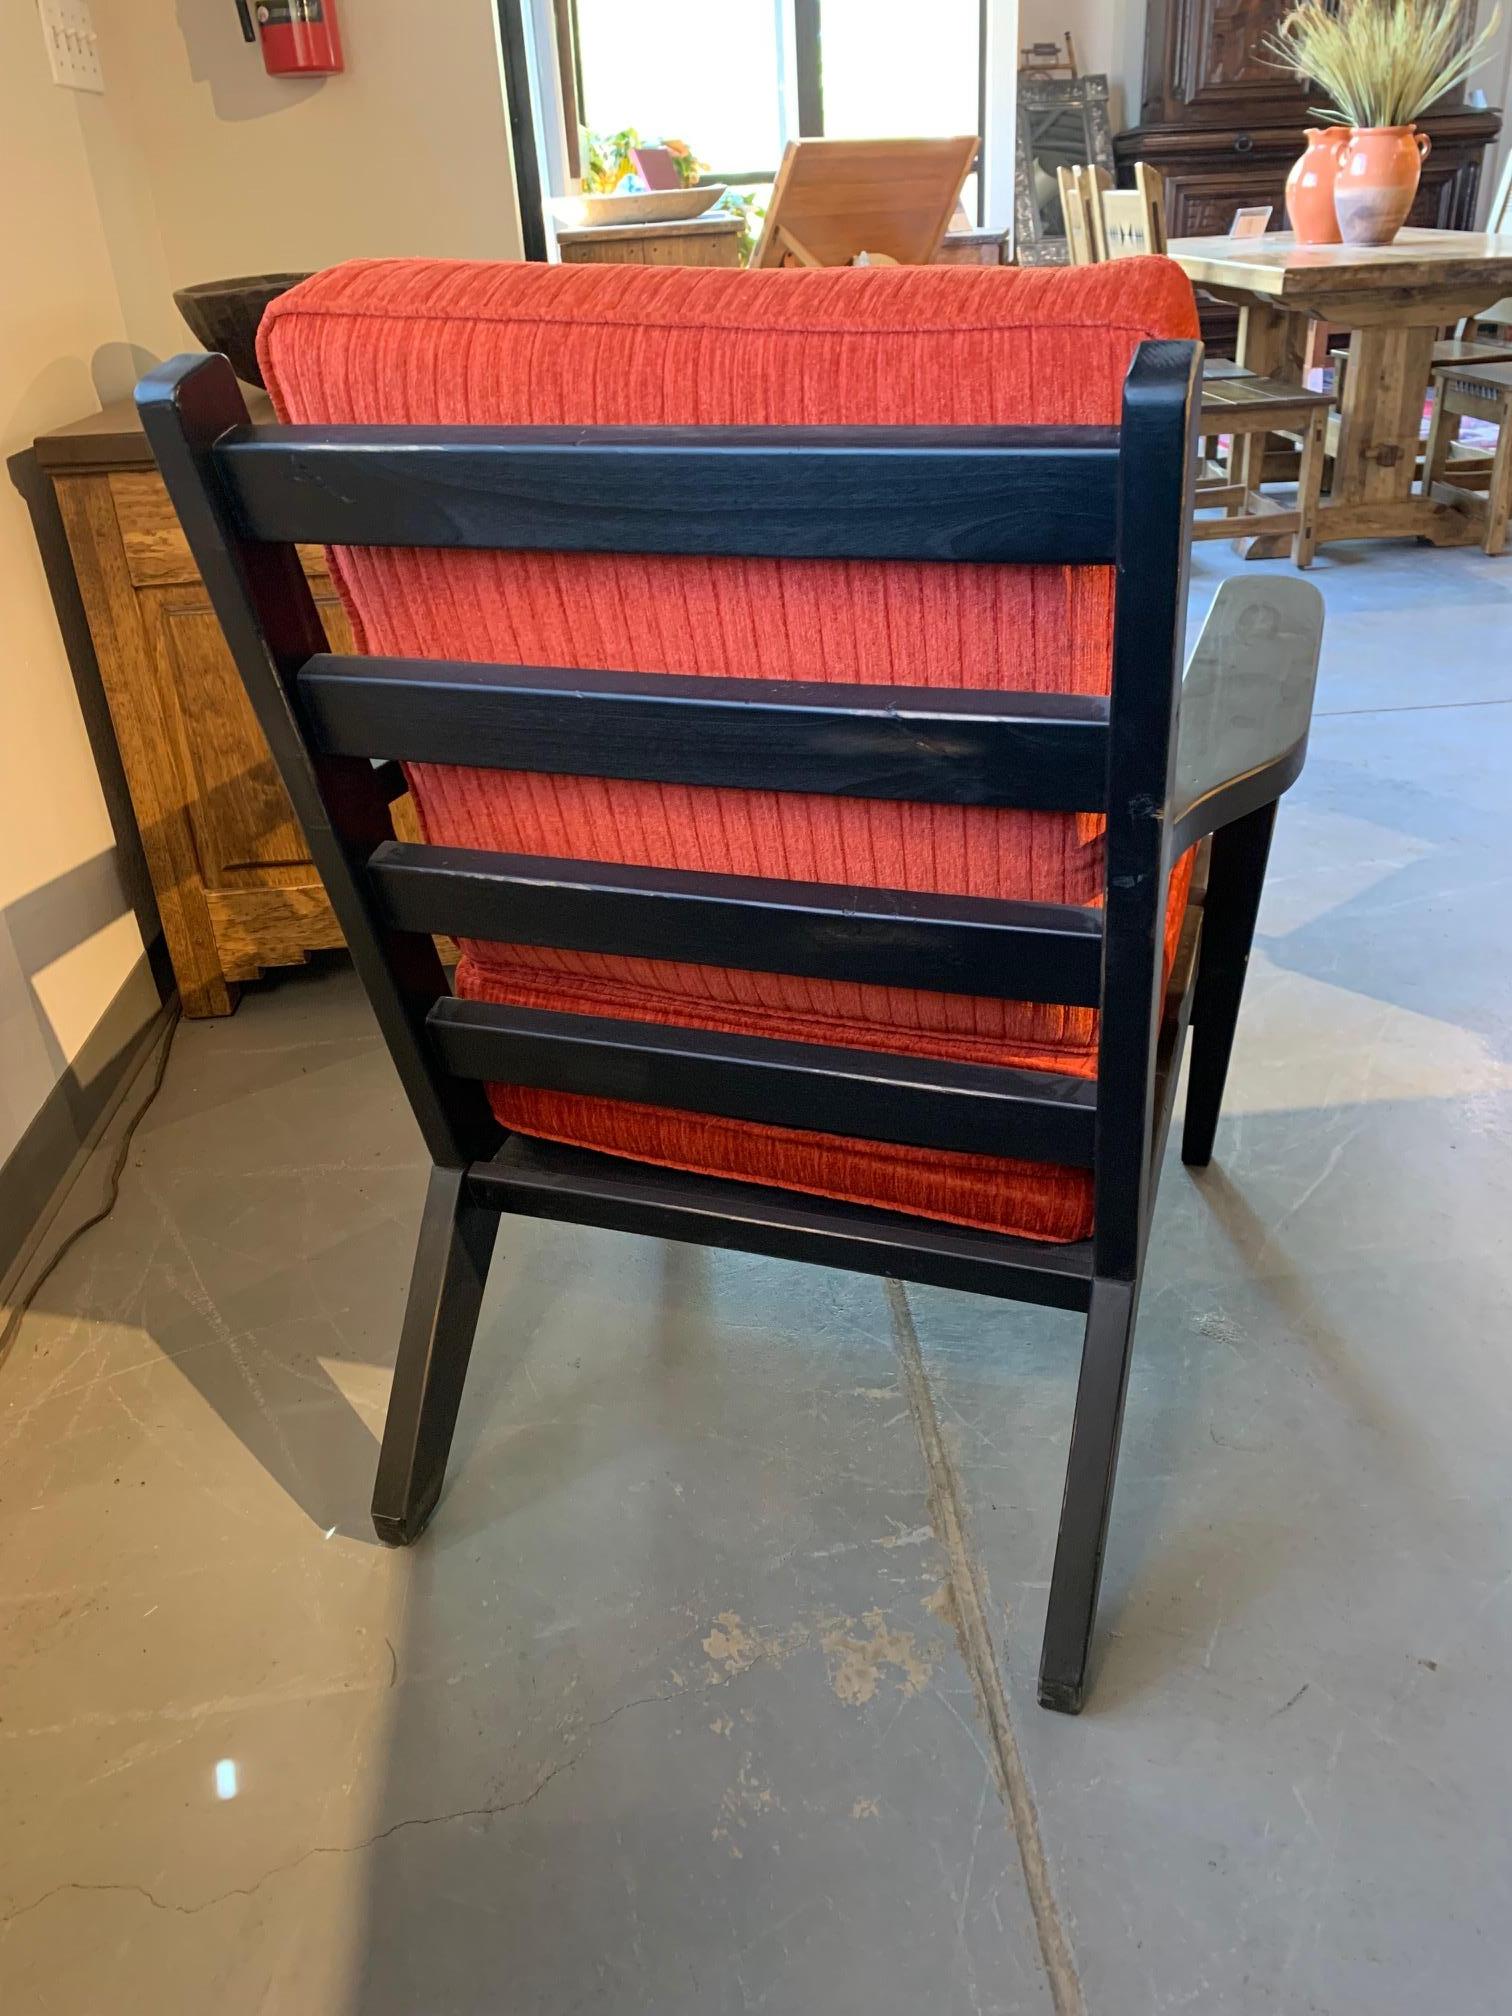 Ernest Thompson Custom Julie Lounge Chair.
Made in Alder with a black scraped finish.
Red upholstered seat and back cushion.

This is a showroom floor model in perfect condition.